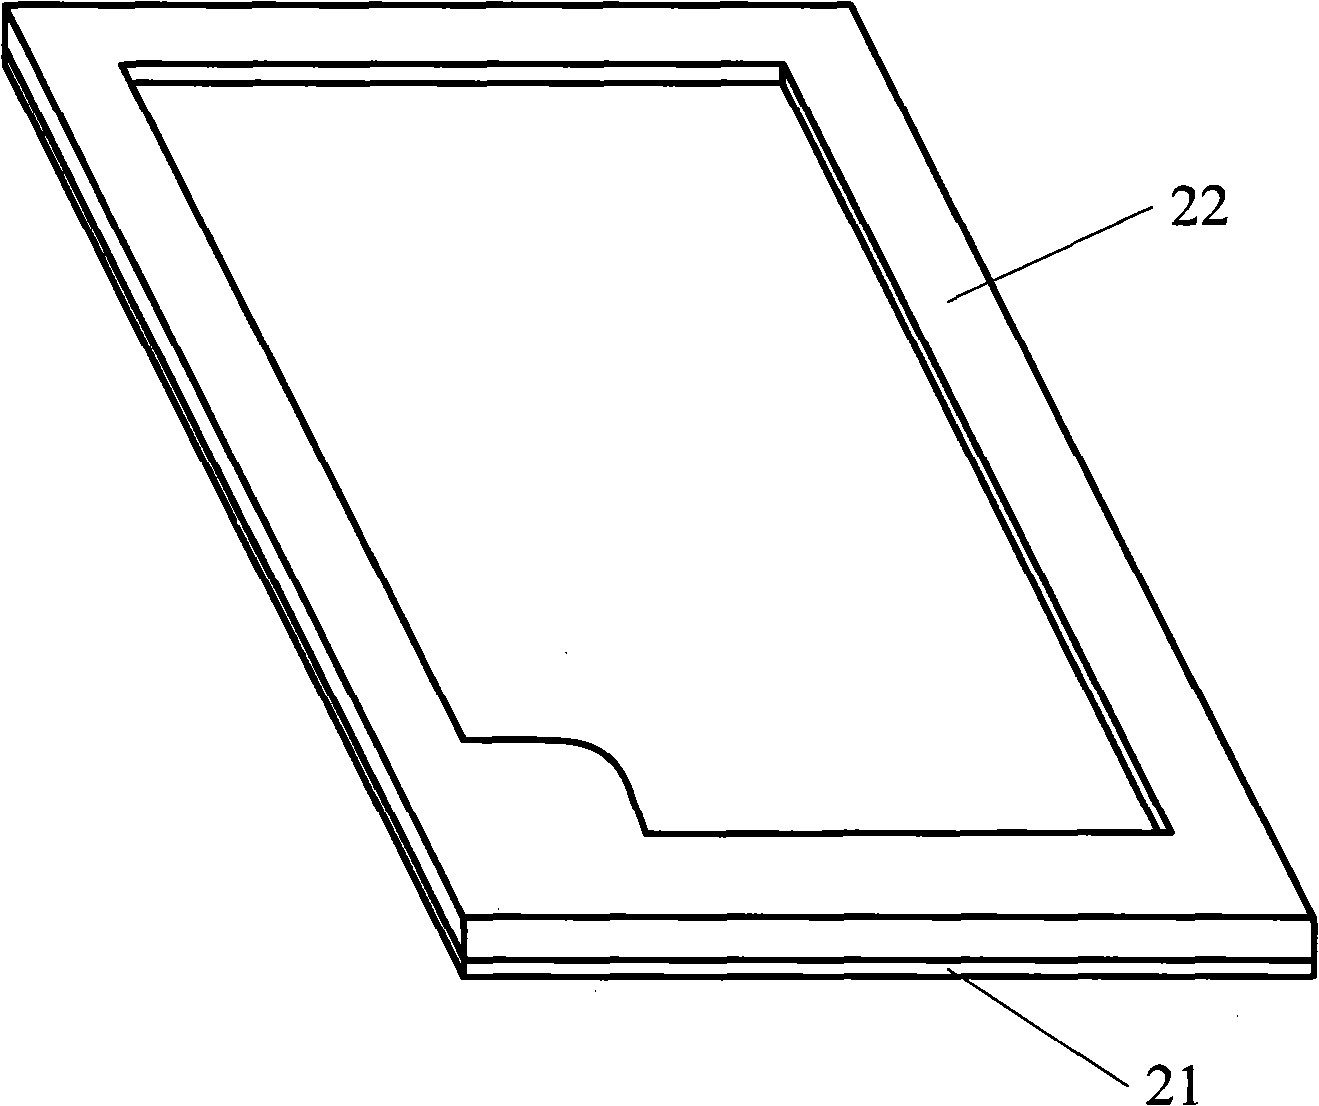 Electromagnetic shielding cover